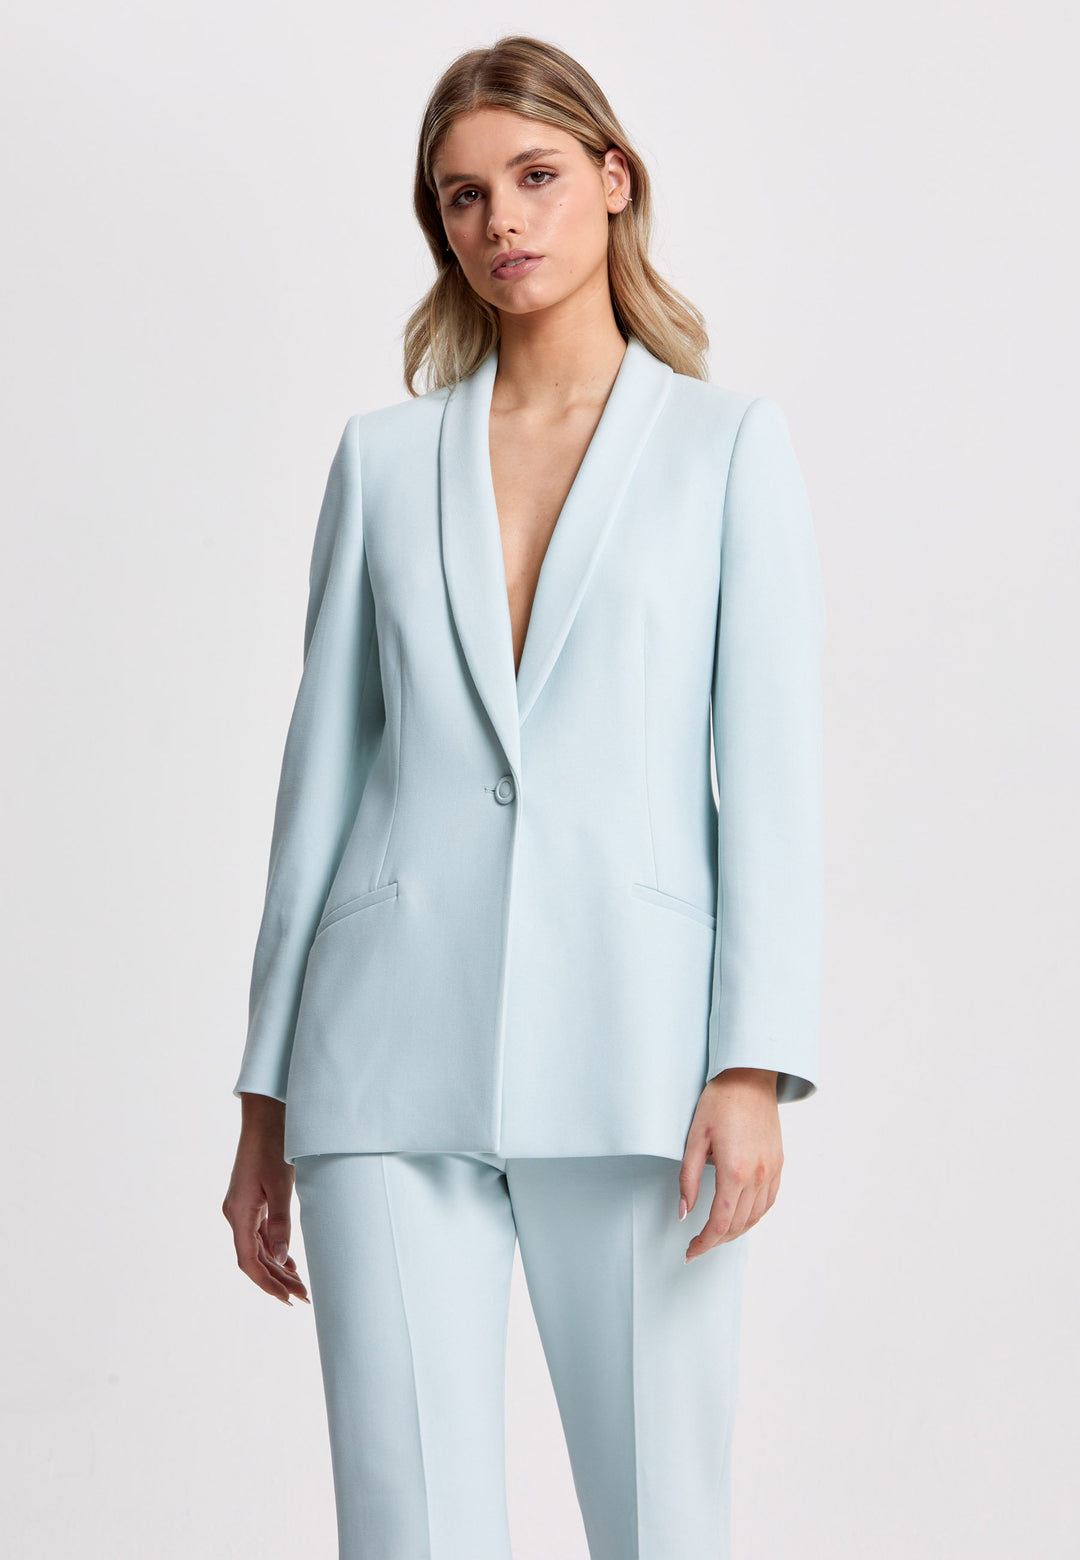 Darcie, a minimalist wardrobe must-have. This investment-worthy tailored tux jacket is engineered with a classic shawl collar and simple jeet pockets. Cut to a semi fitted silhouette with a single button closure. Fabricated in our signature double crepe with a hint of stretch. The perfect balance between classic & elegance. Pair with a simple tee or elevate the look with the co-ordinating kelly pant.